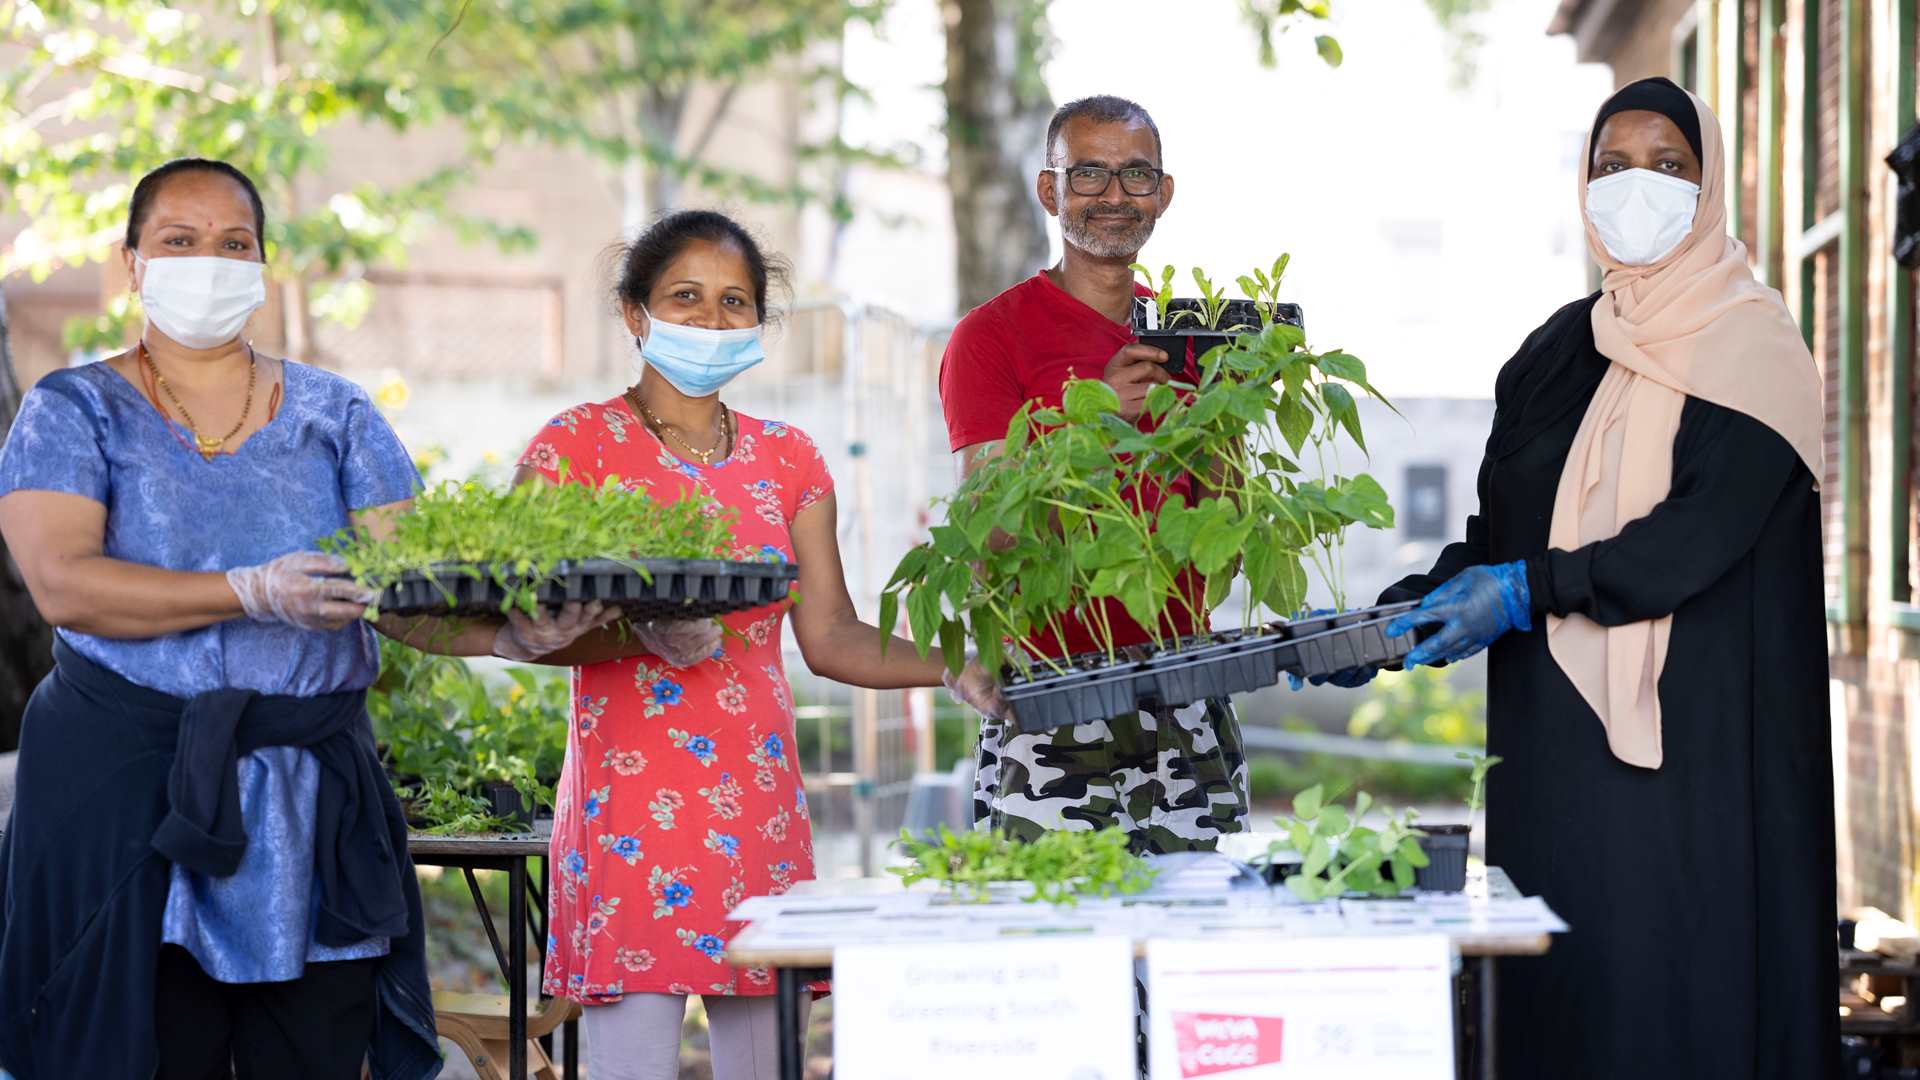 A woman in a face mask handing out plants to community members